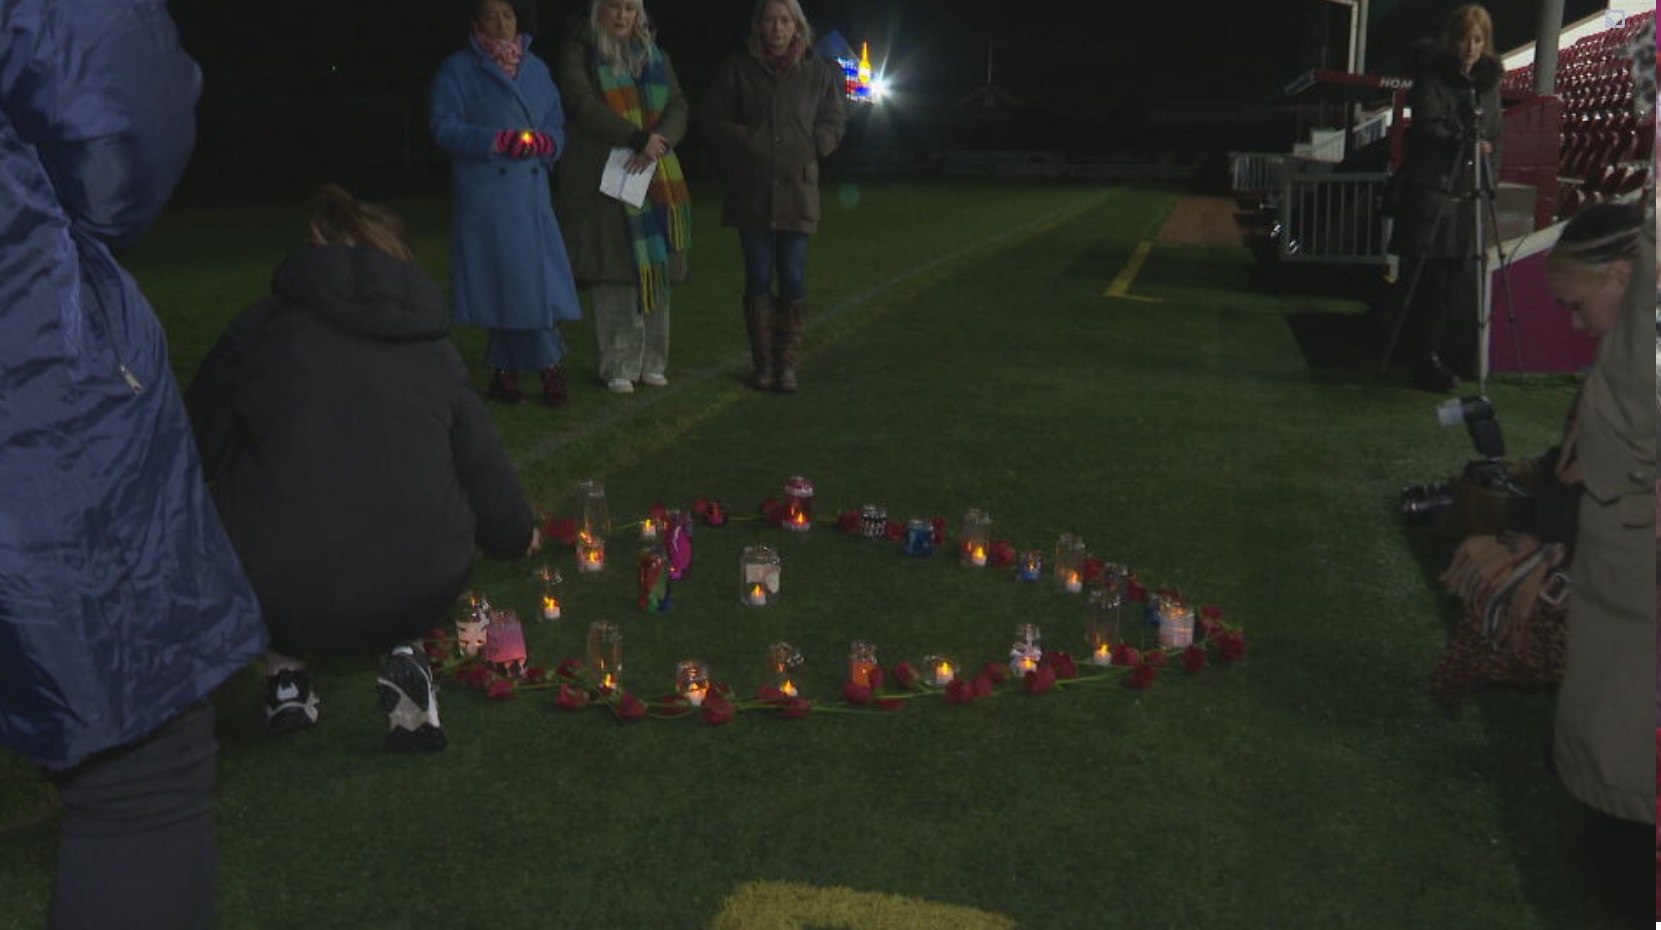 Vigil takes place in memory of women who have been killed by men